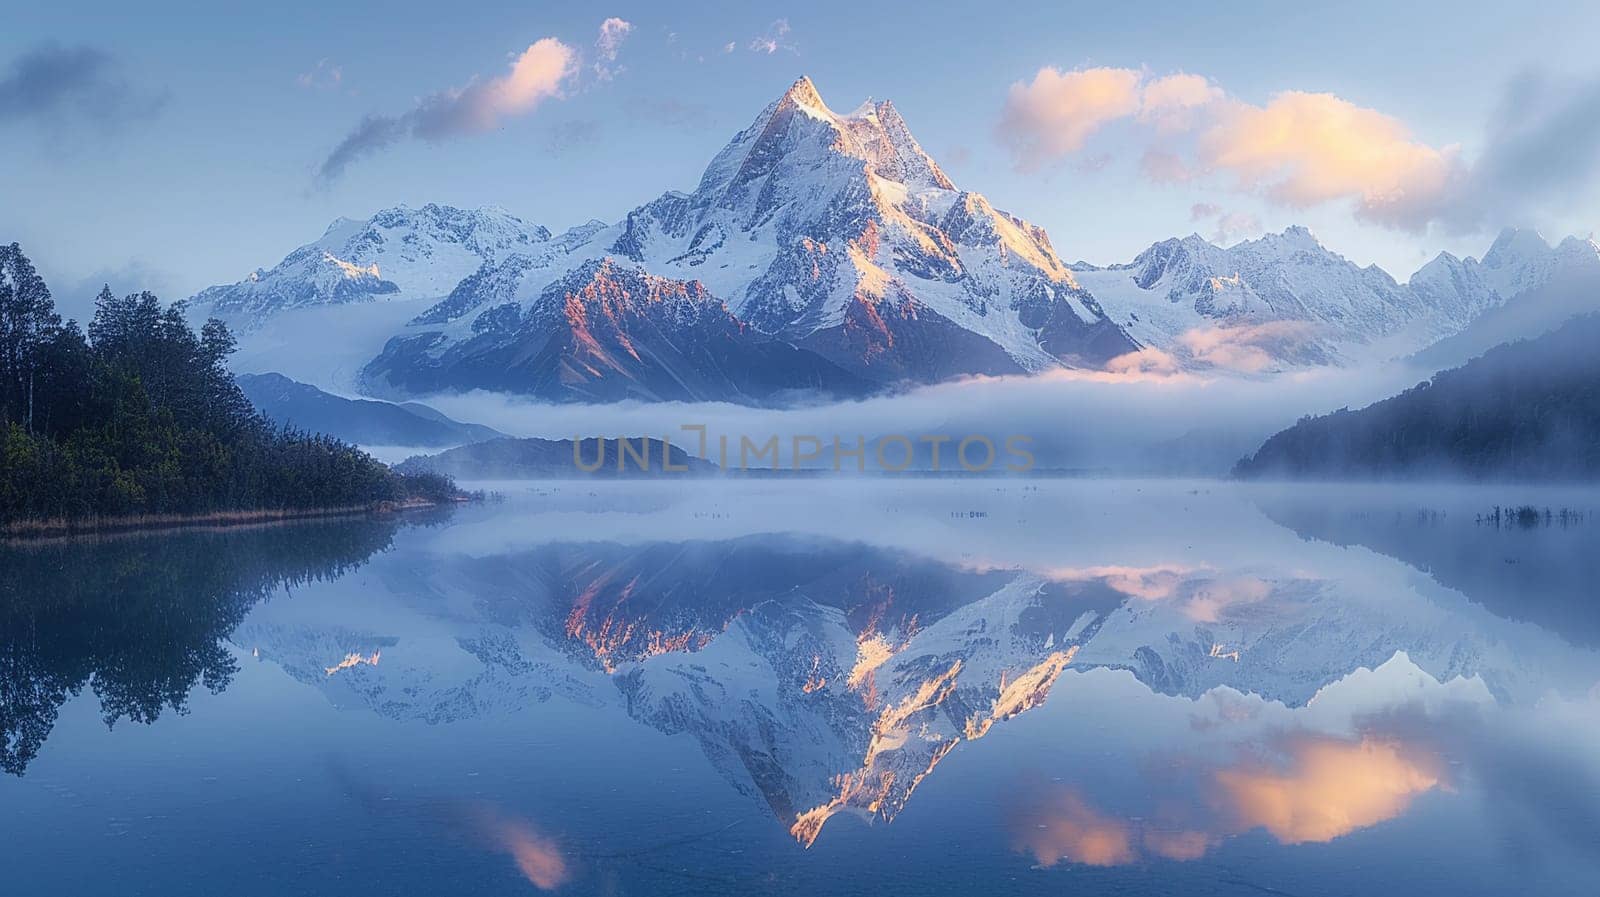 Snow-Capped Mountain Reflected in a Crystal Lake, The peaks blur with the reflection, nature's grandeur doubled in still waters.